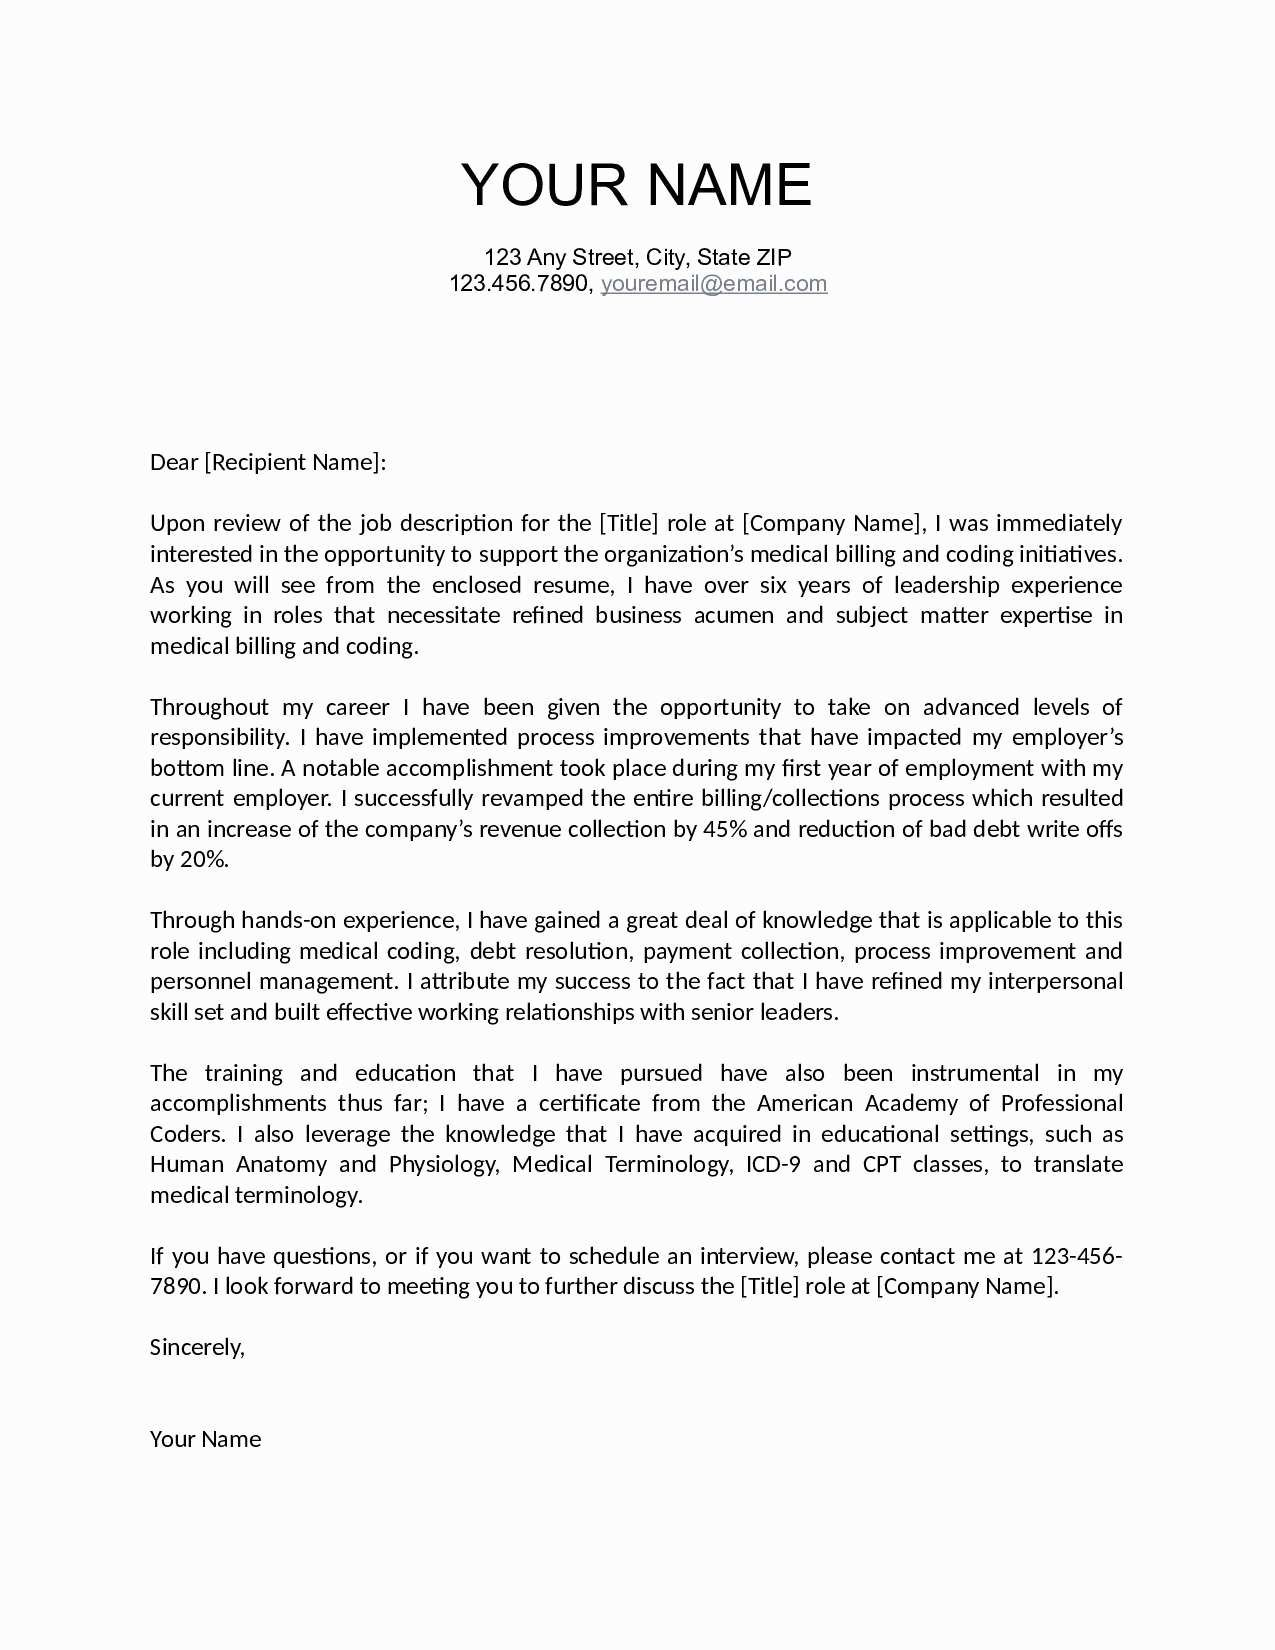 Security Cover Letter Template - Covering Letter for Work Experience Best Job Fer Letter Template